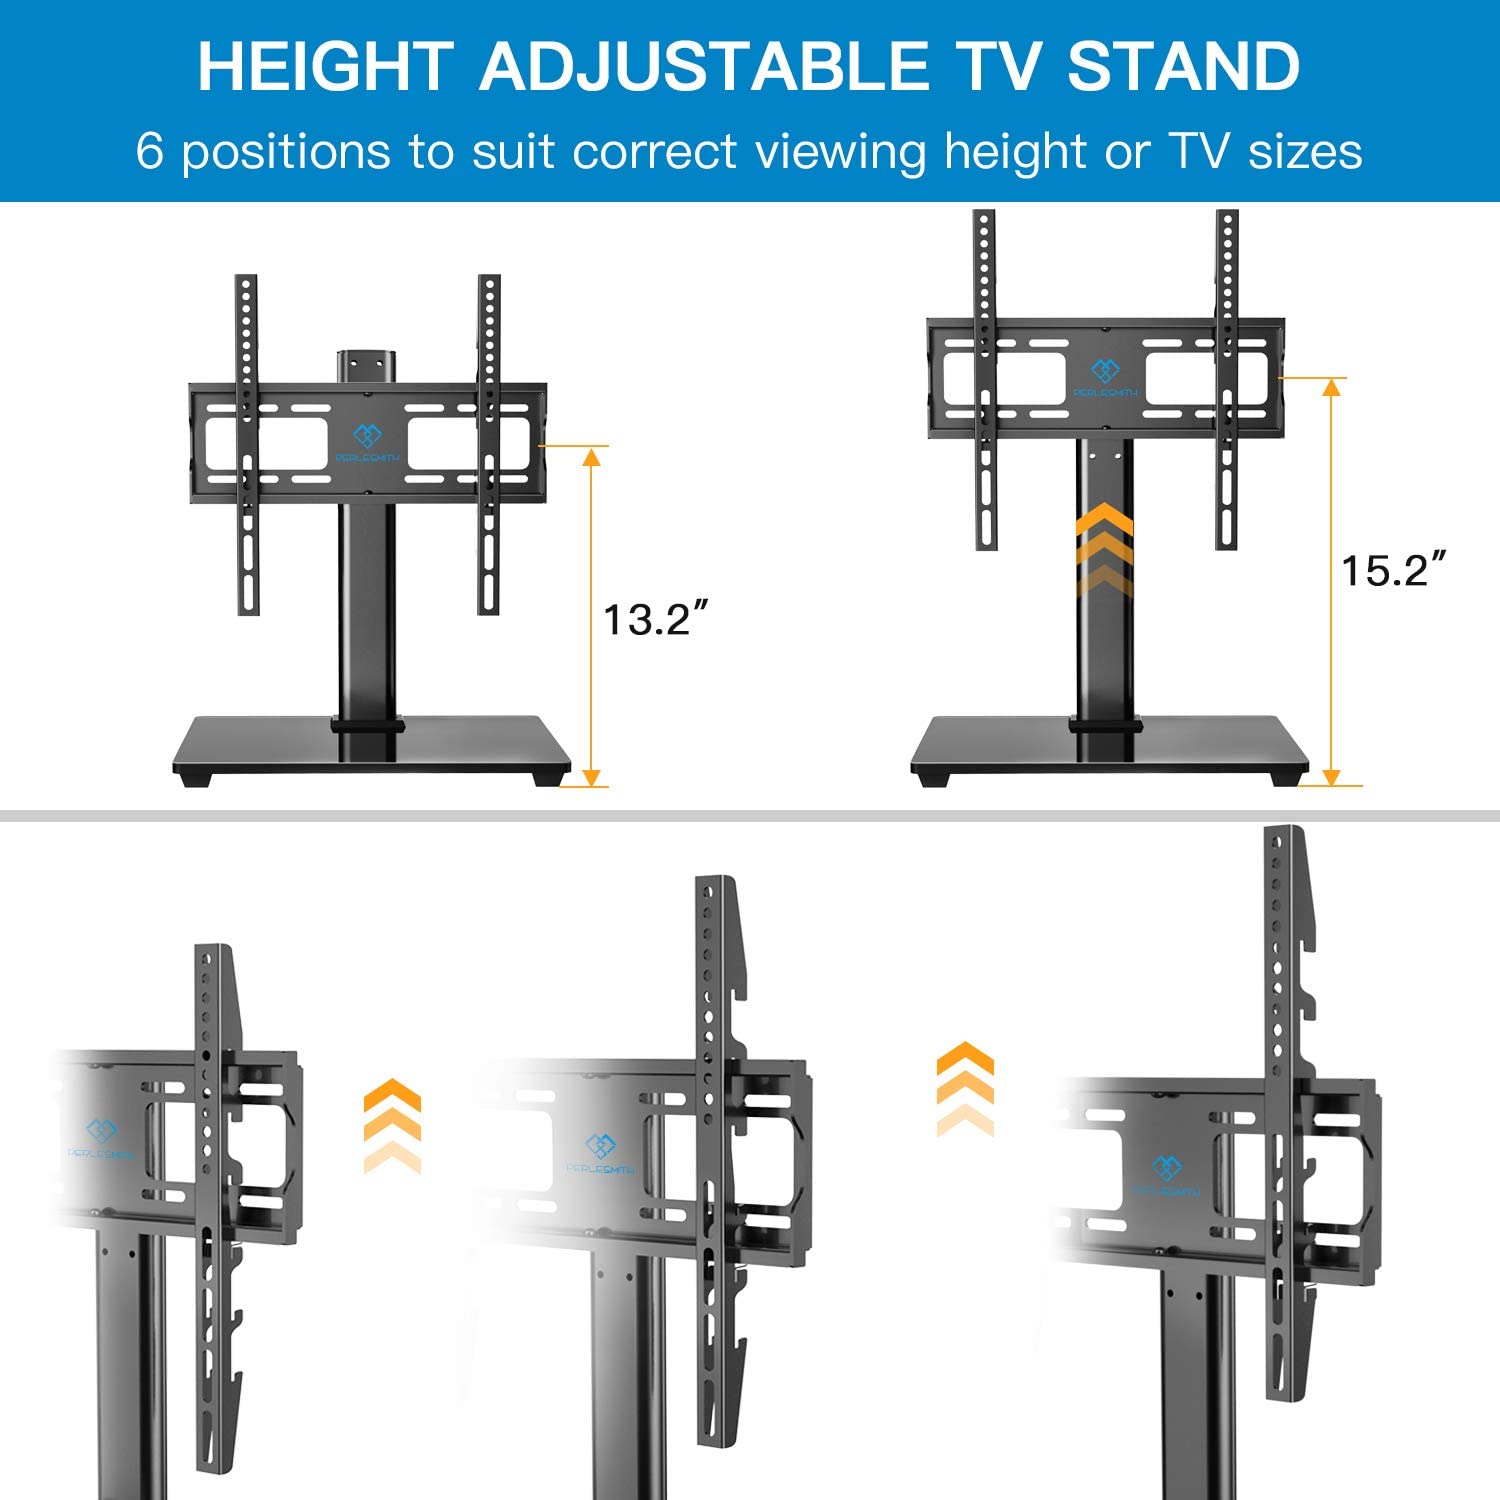 PERLESMITH Swivel Universal TV Stand / Base - Table Top TV Stand for 32-55 inch LCD LED TVs - Height Adjustable TV Mount Stand with Tempered Glass Base, VESA 400x400mm, Holds up to 88lbs - image 3 of 3